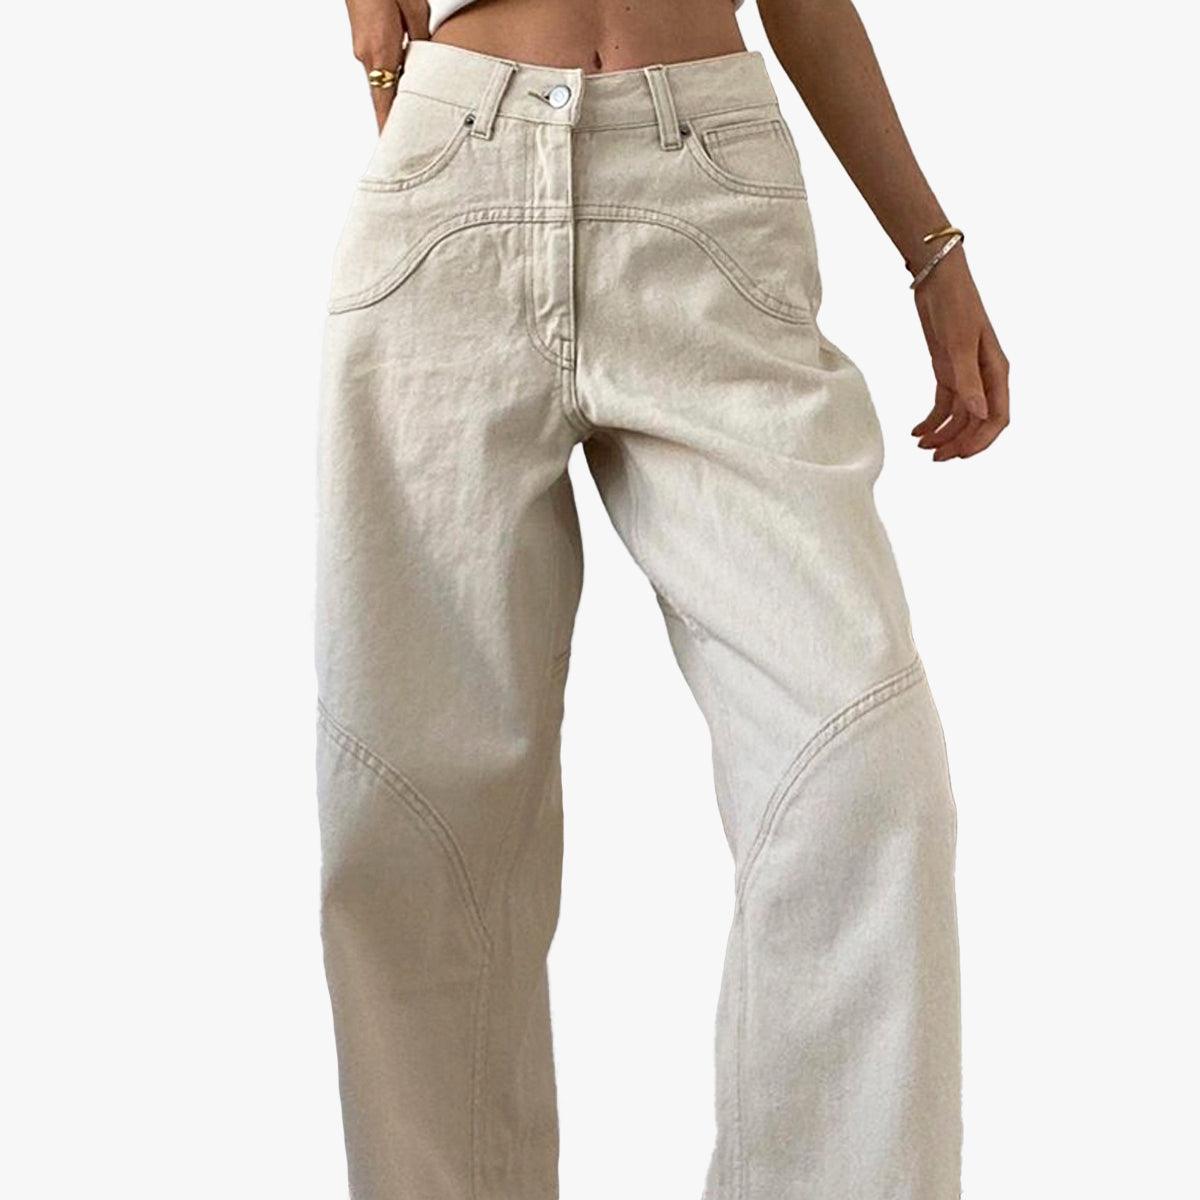 Western Aesthetic Wide Leg Beige Jeans • Aesthetic Clothes